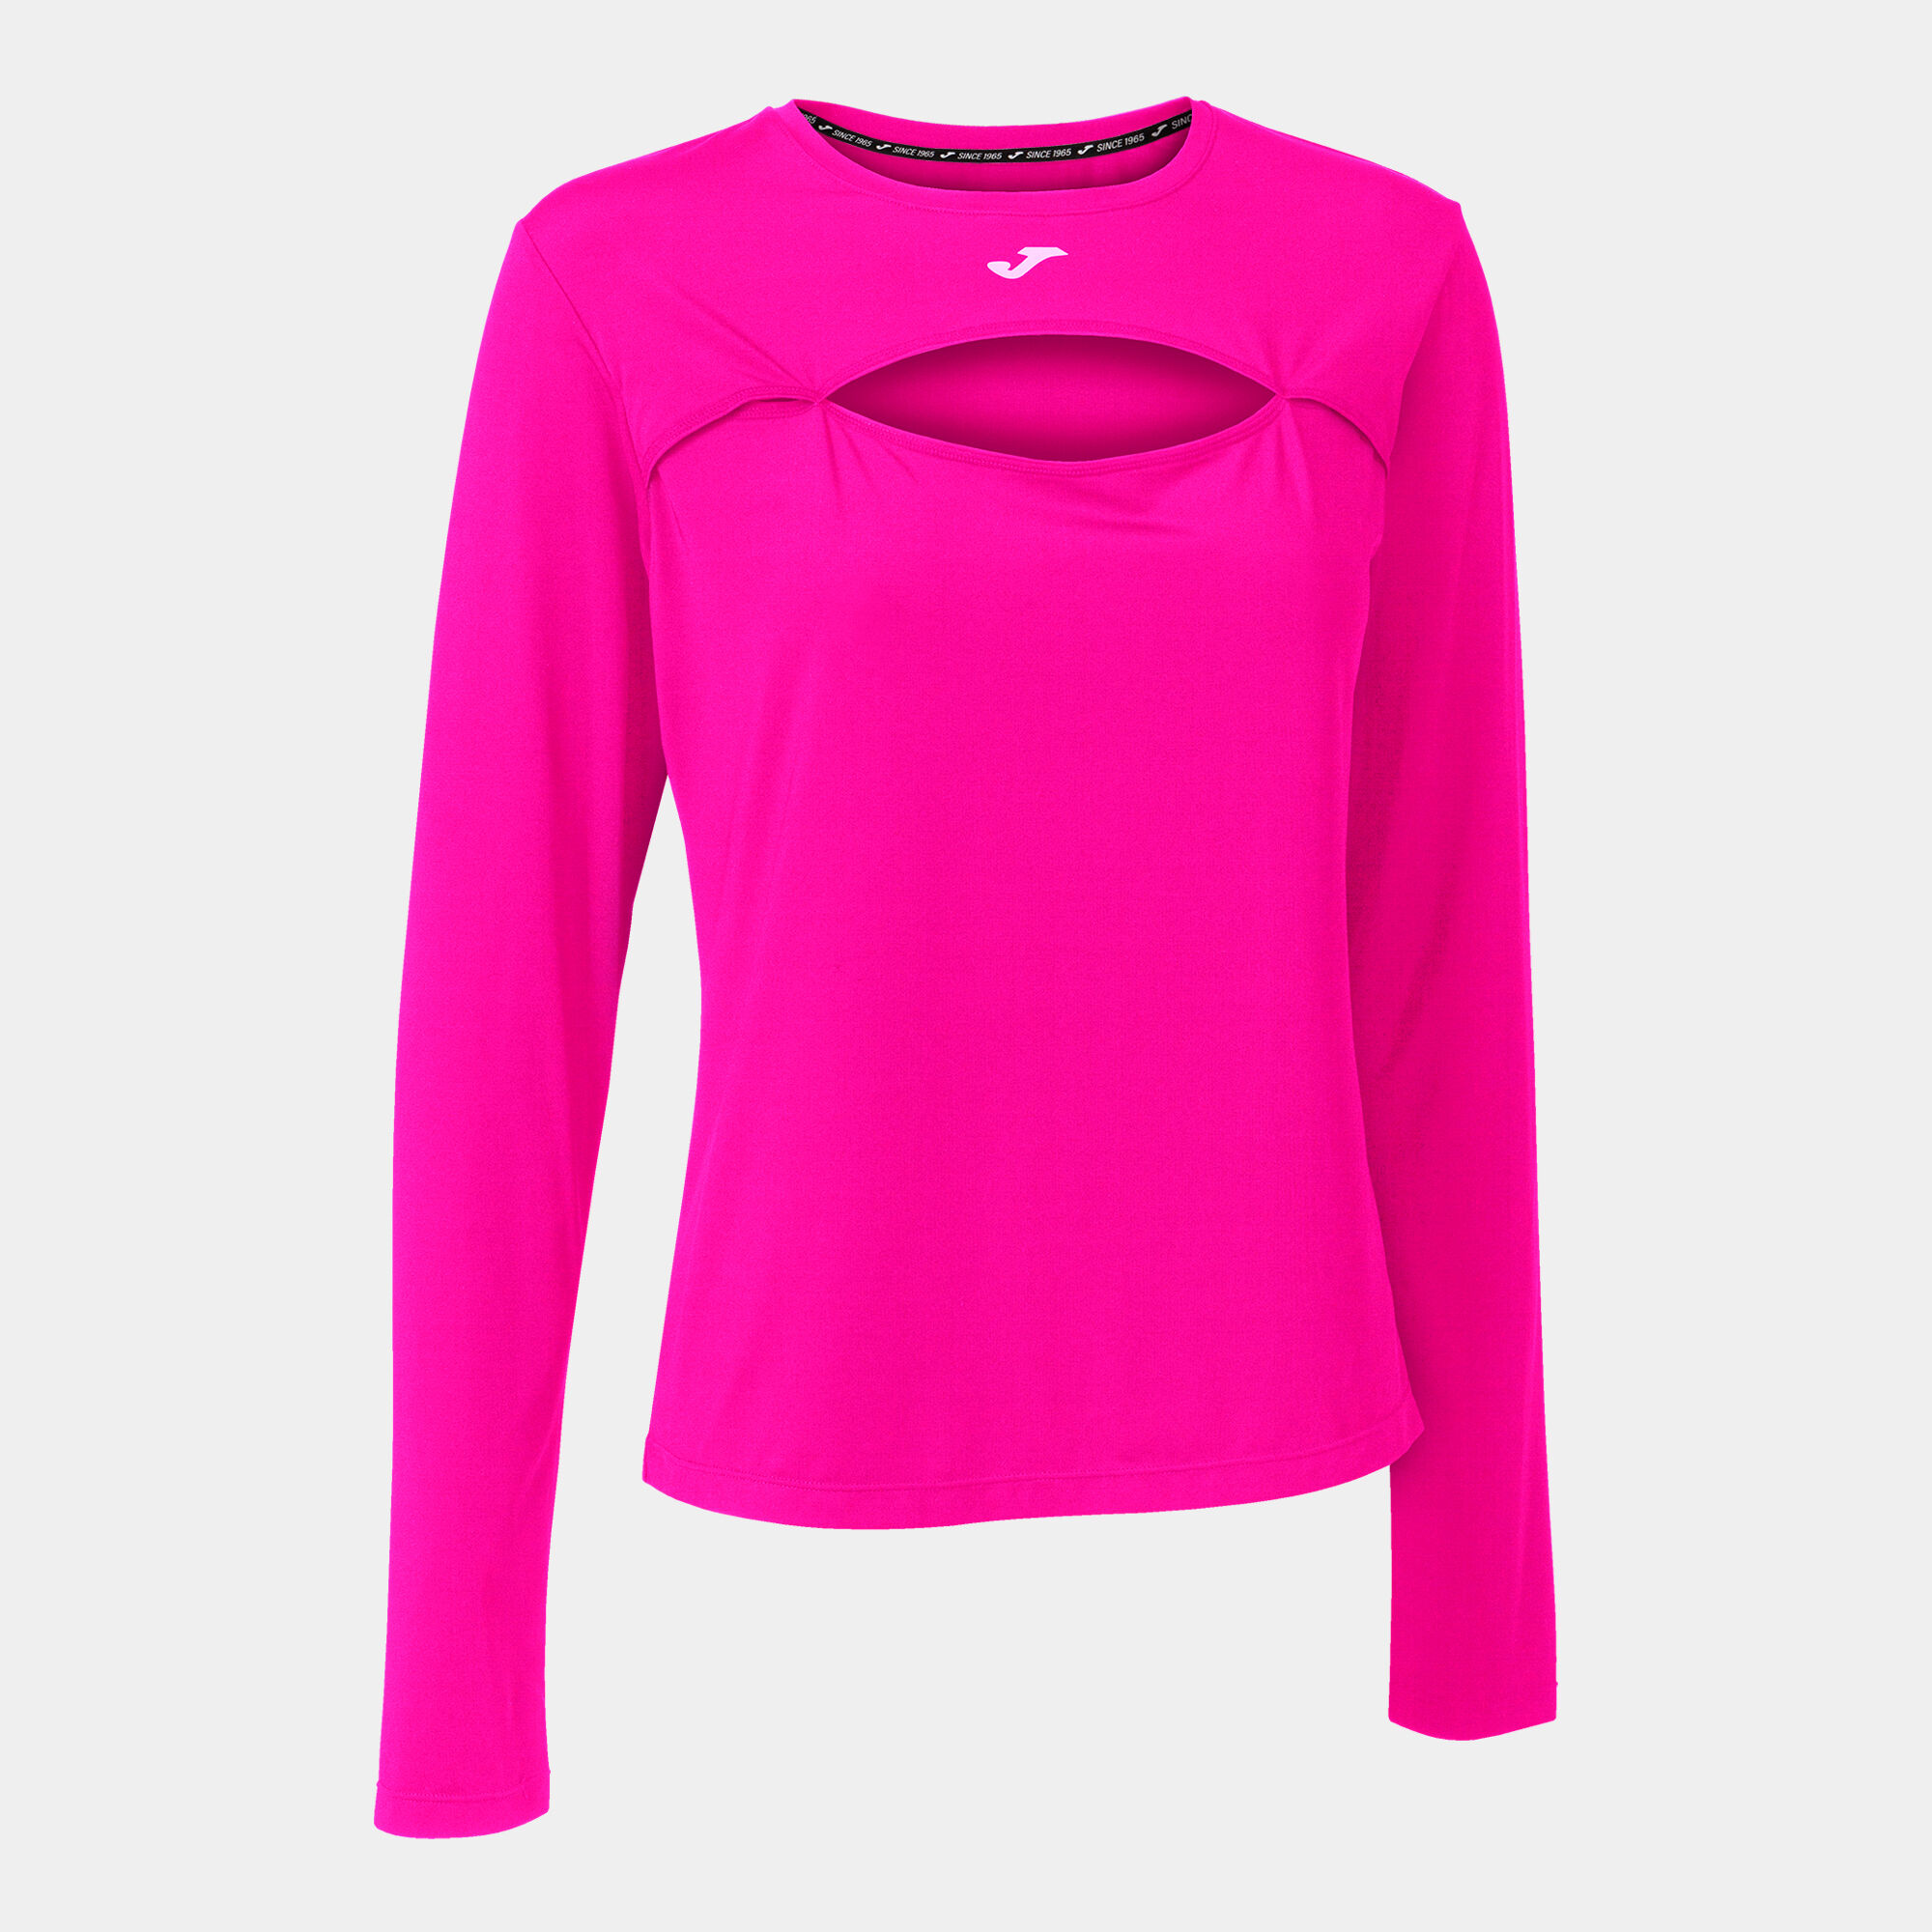 MAILLOT MANCHES LONGUES FEMME ZERO ROSE FLUO